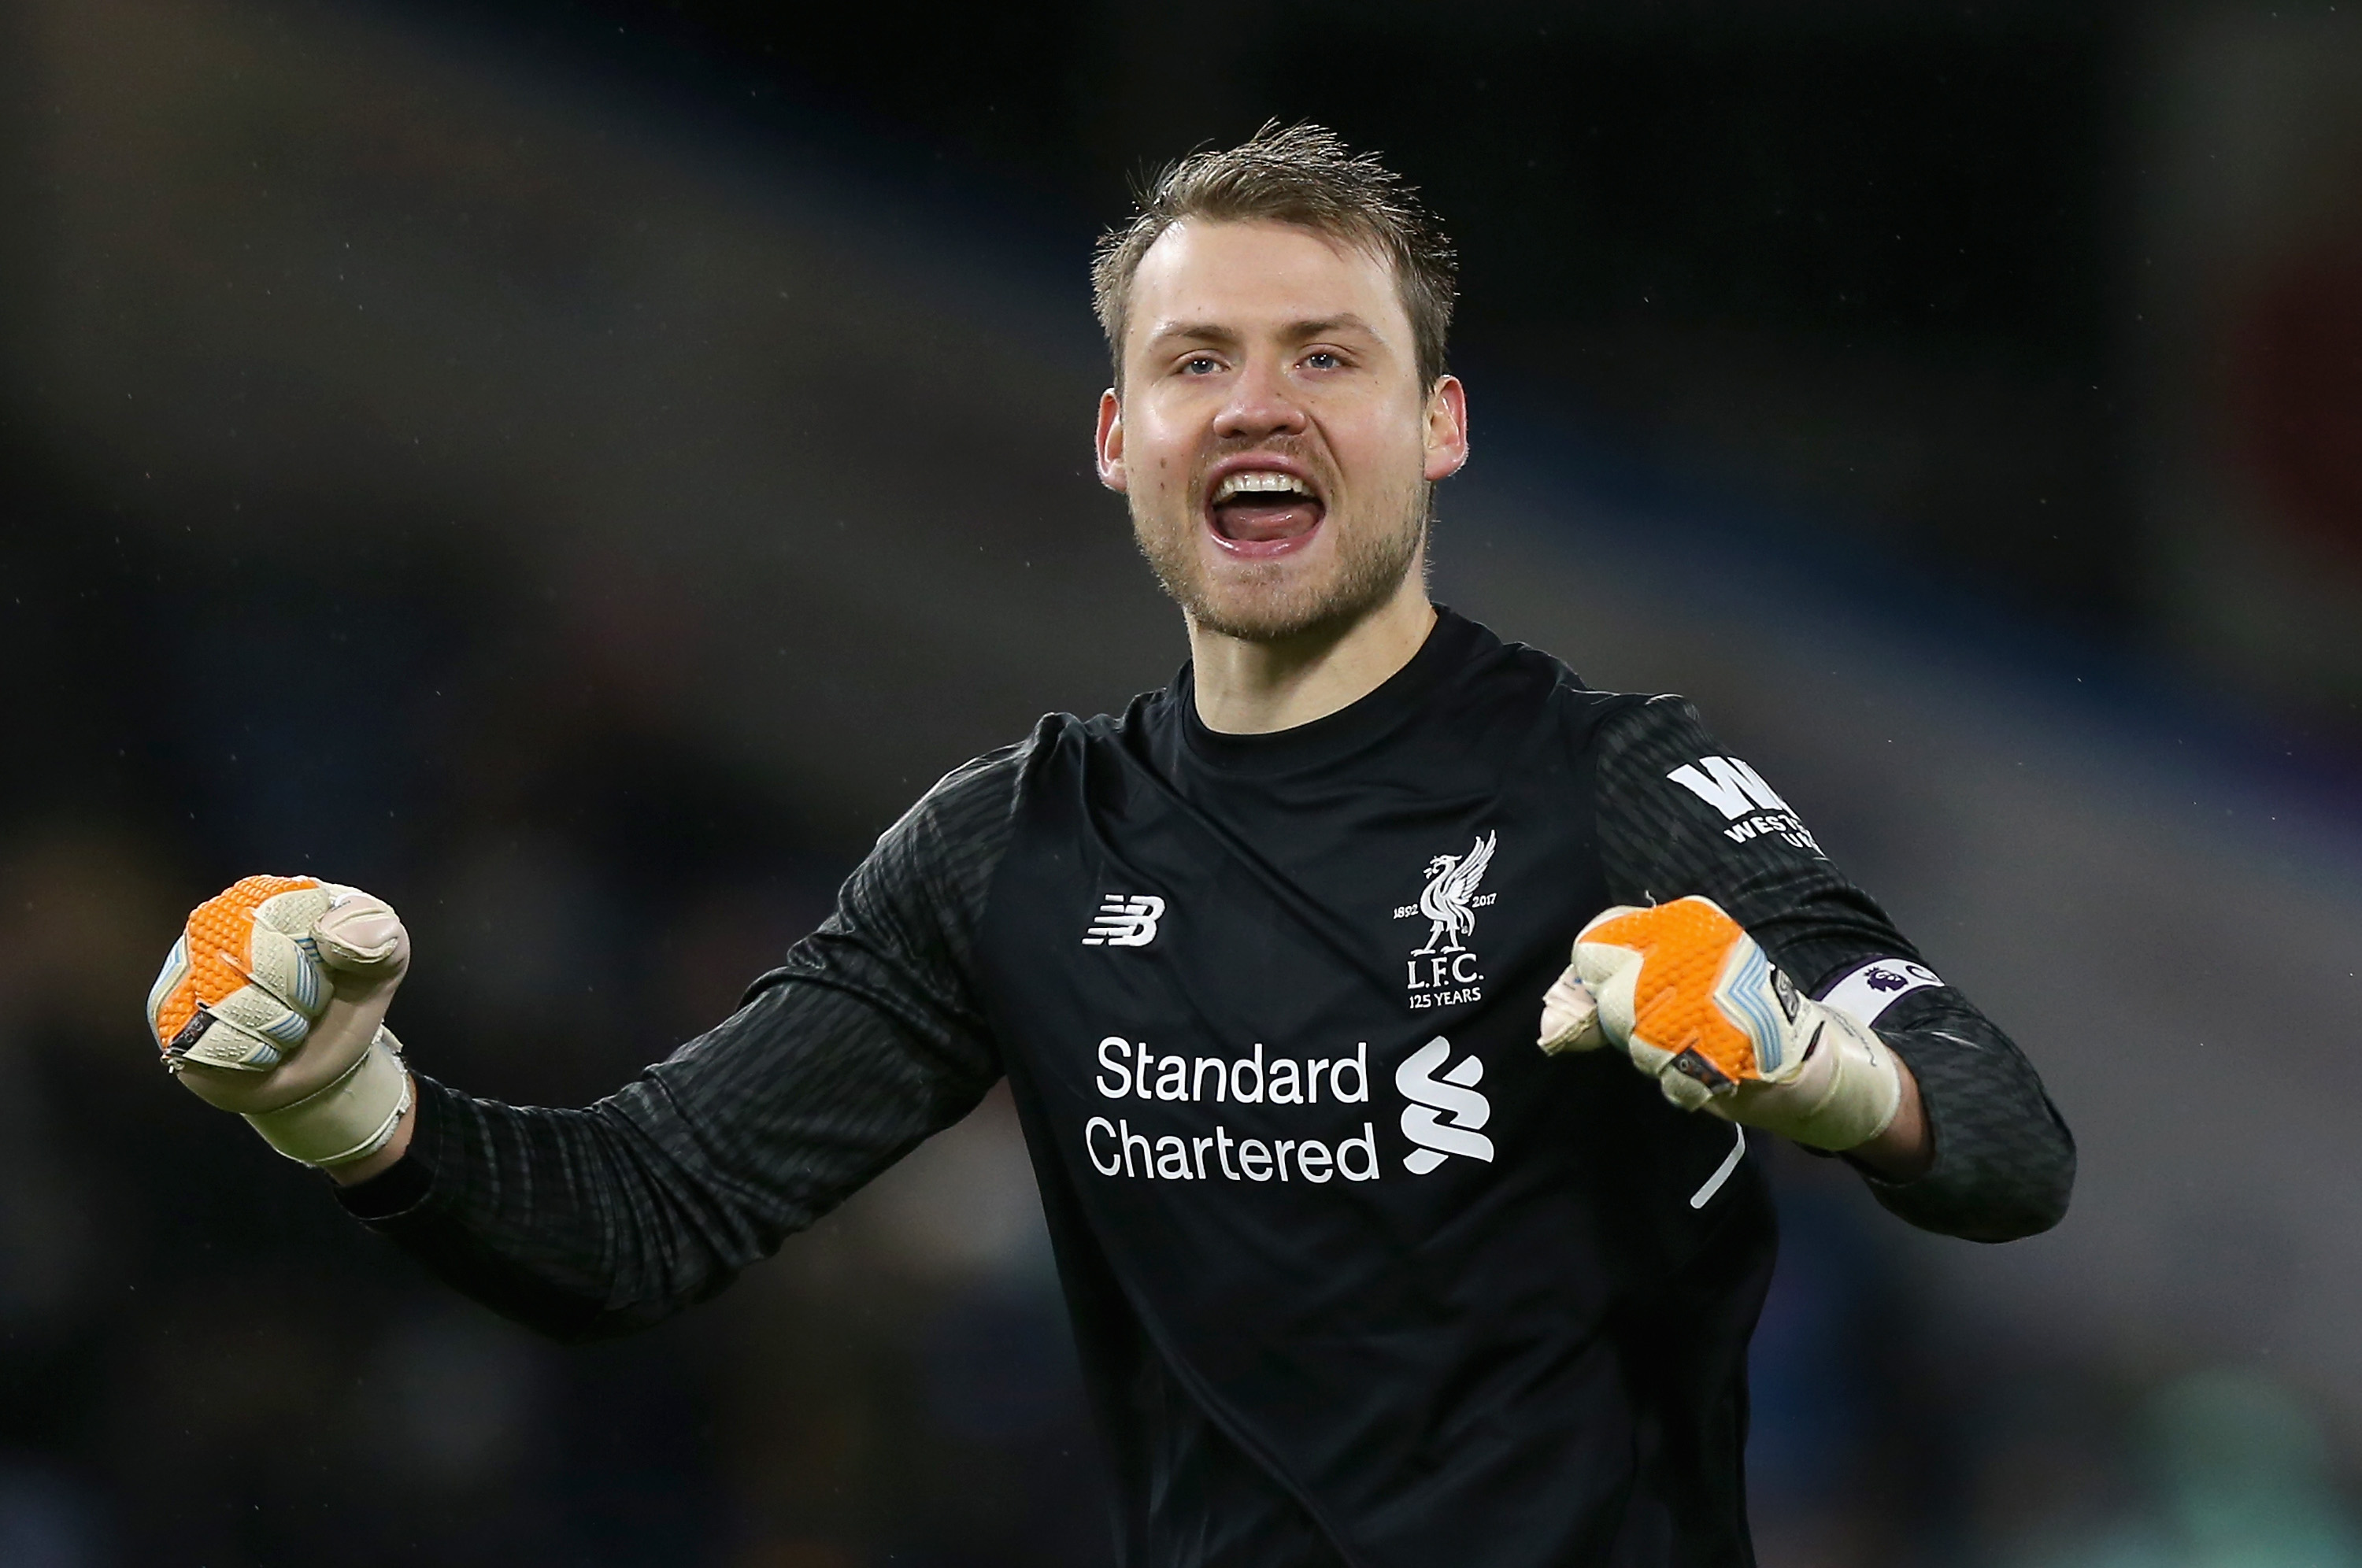 BURNLEY, ENGLAND - JANUARY 01: Simon Mignolet of Liverpool celebrates victory after the Premier League match between Burnley and Liverpool at Turf Moor on January 1, 2018 in Burnley, England.  (Photo by Nigel Roddis/Getty Images)